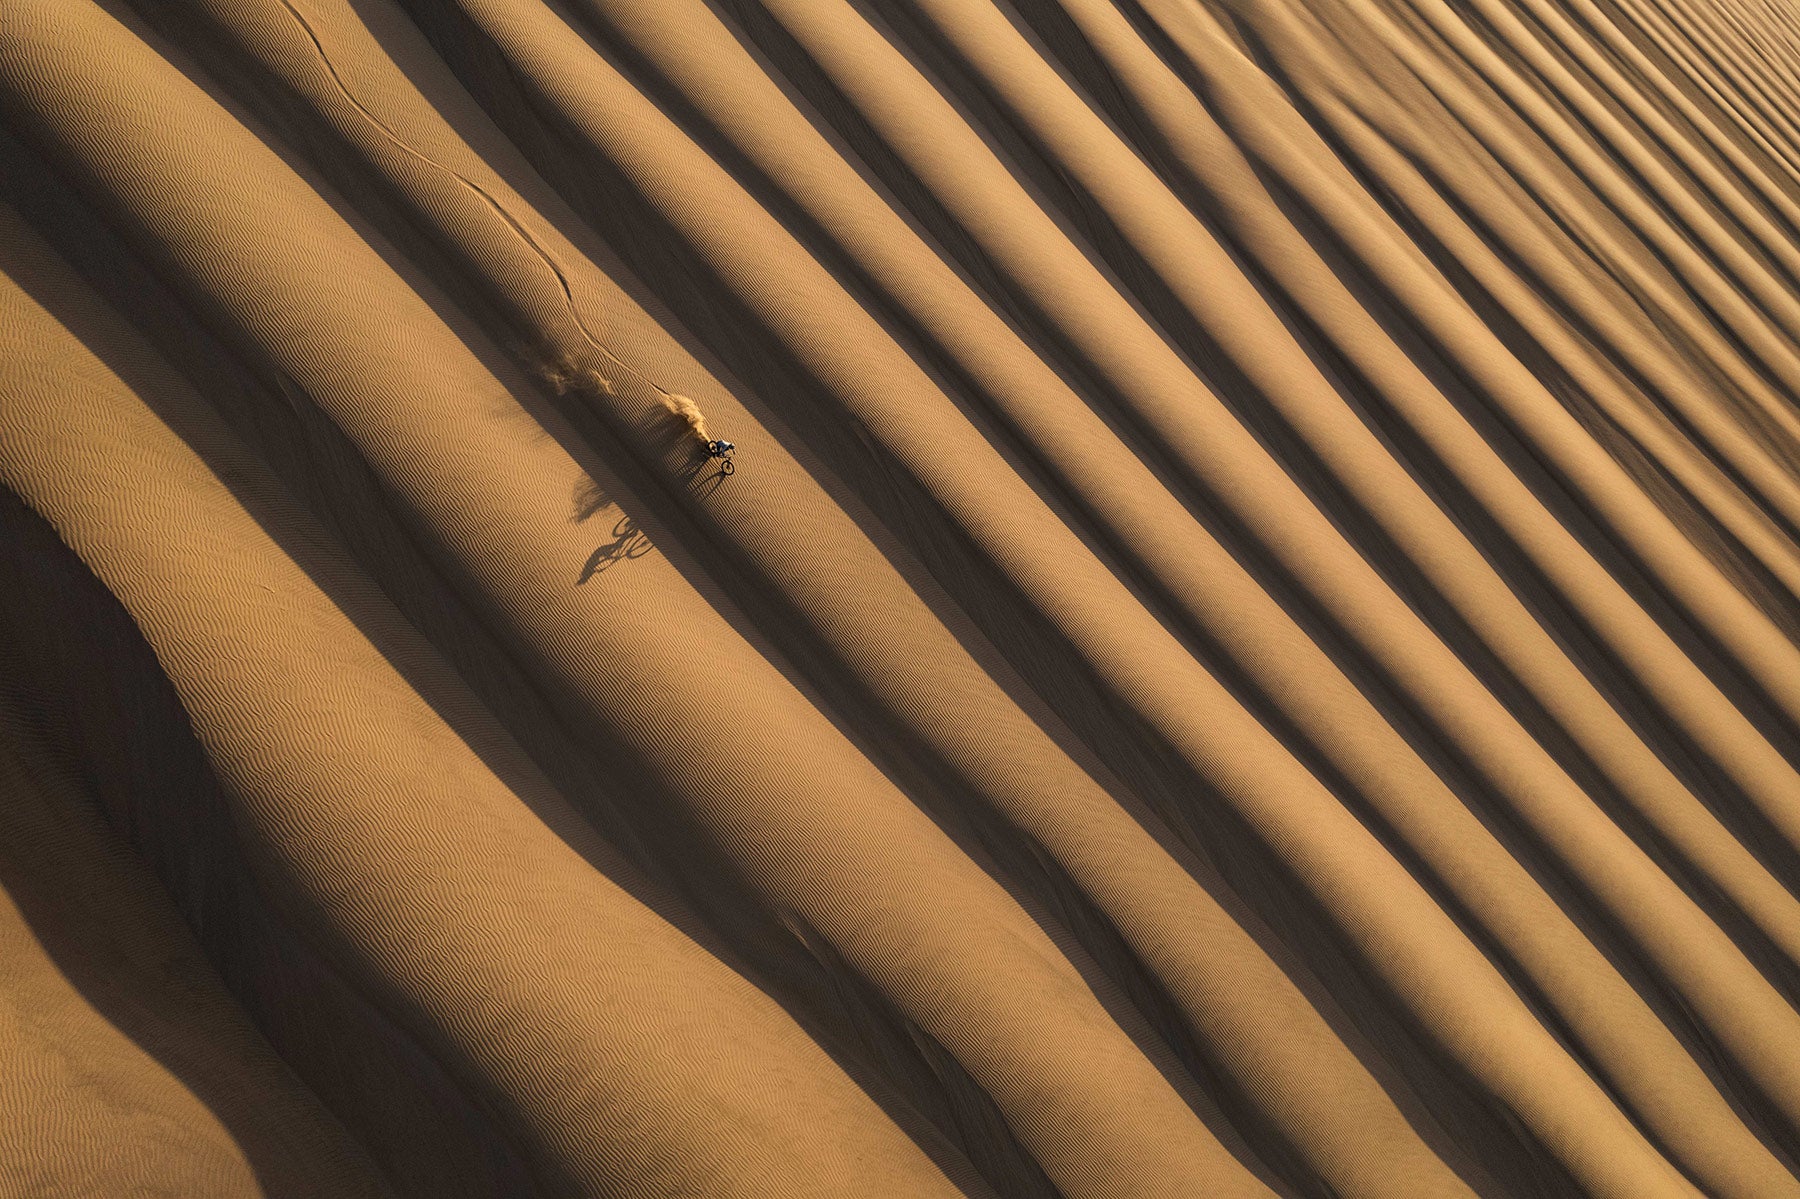 Rows of sand dunes are seen from above while a mountain biker cuts a line down one.